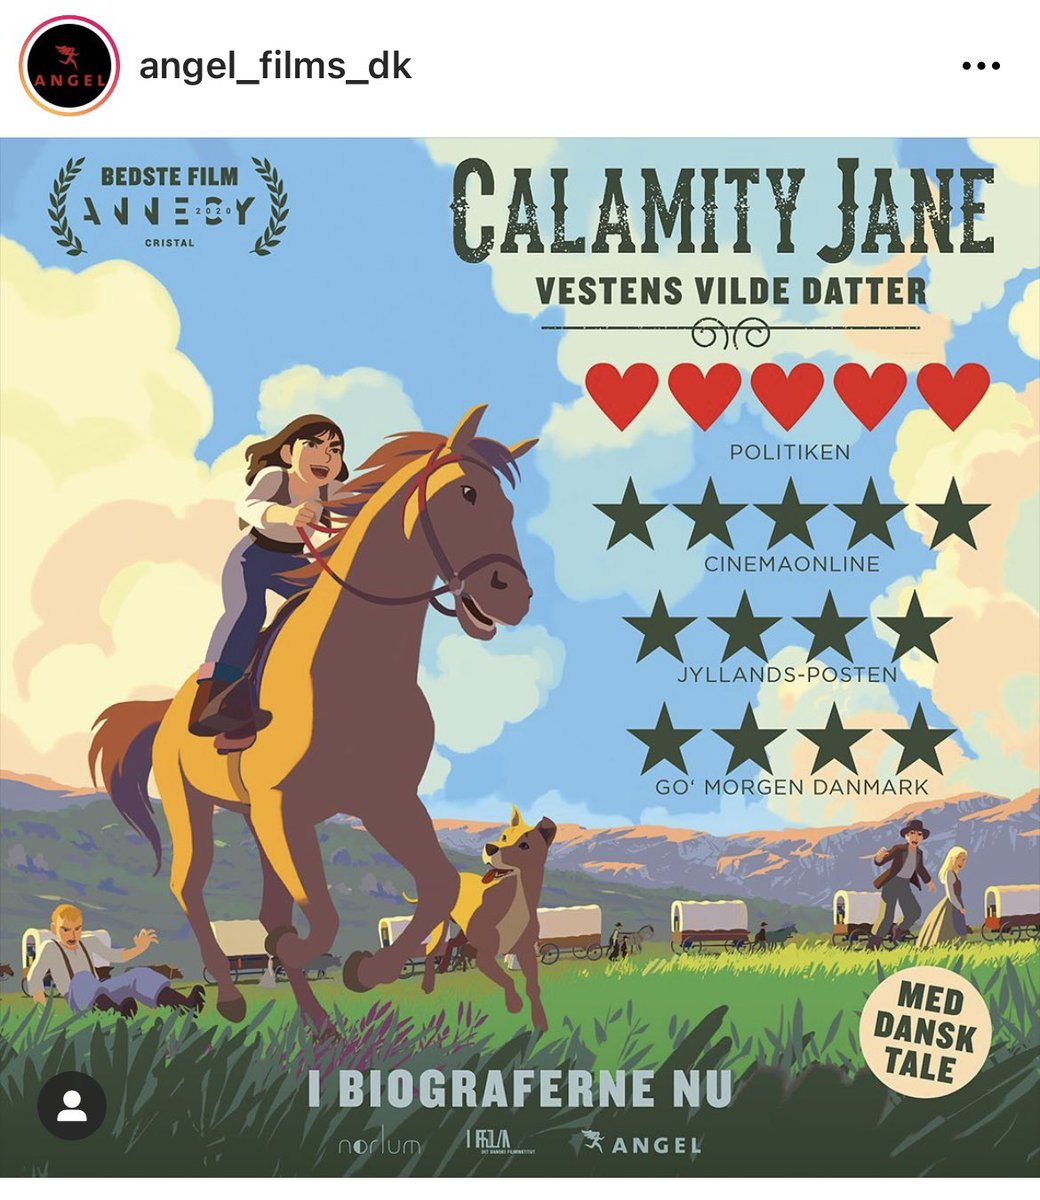 Stars to Calamity today from the Danish Press ⭐️⭐️⭐️⭐️⭐️ @Calamity_film @noerlum @ViborgKommune @Filmpuljen @filminstituttet #filmreviews #animation #animated #viborgvisuals #viborg #creativecity